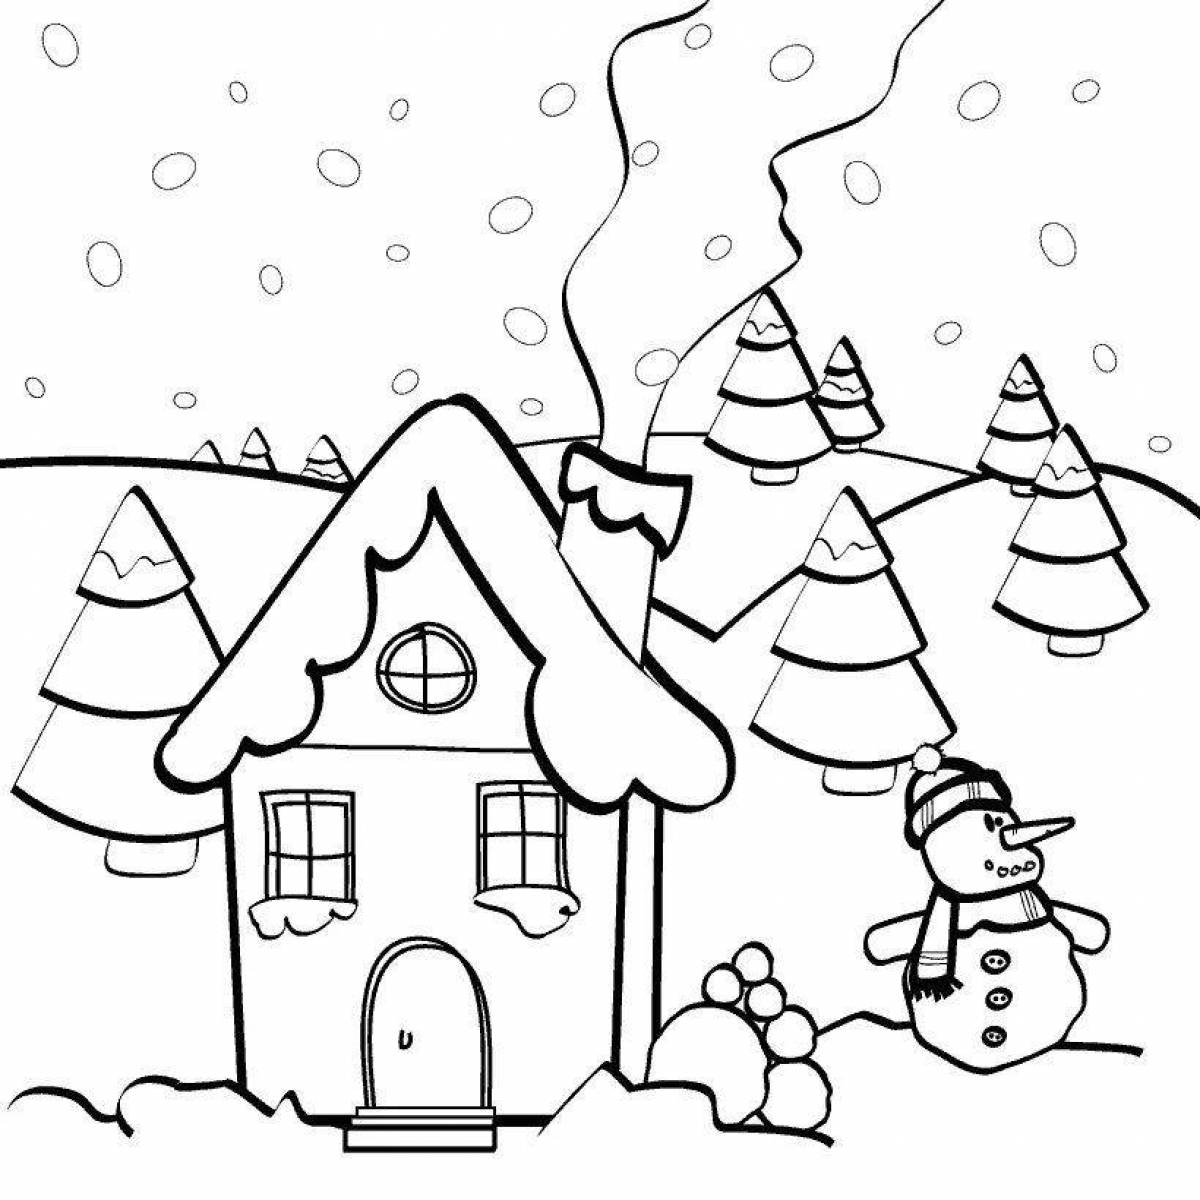 Amazing treehouse coloring book